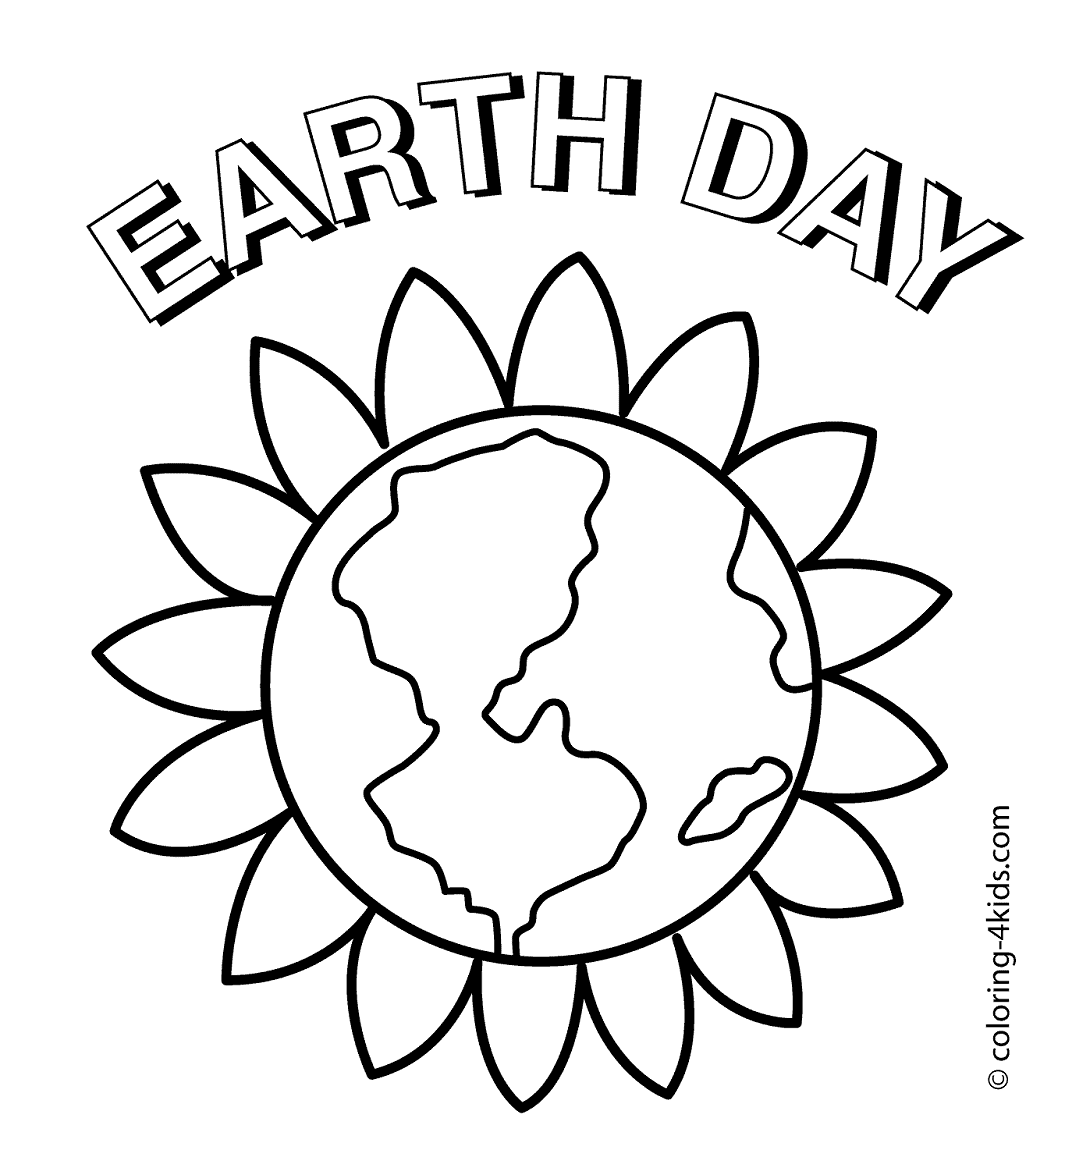 Earth Day Flower Coloring Pages